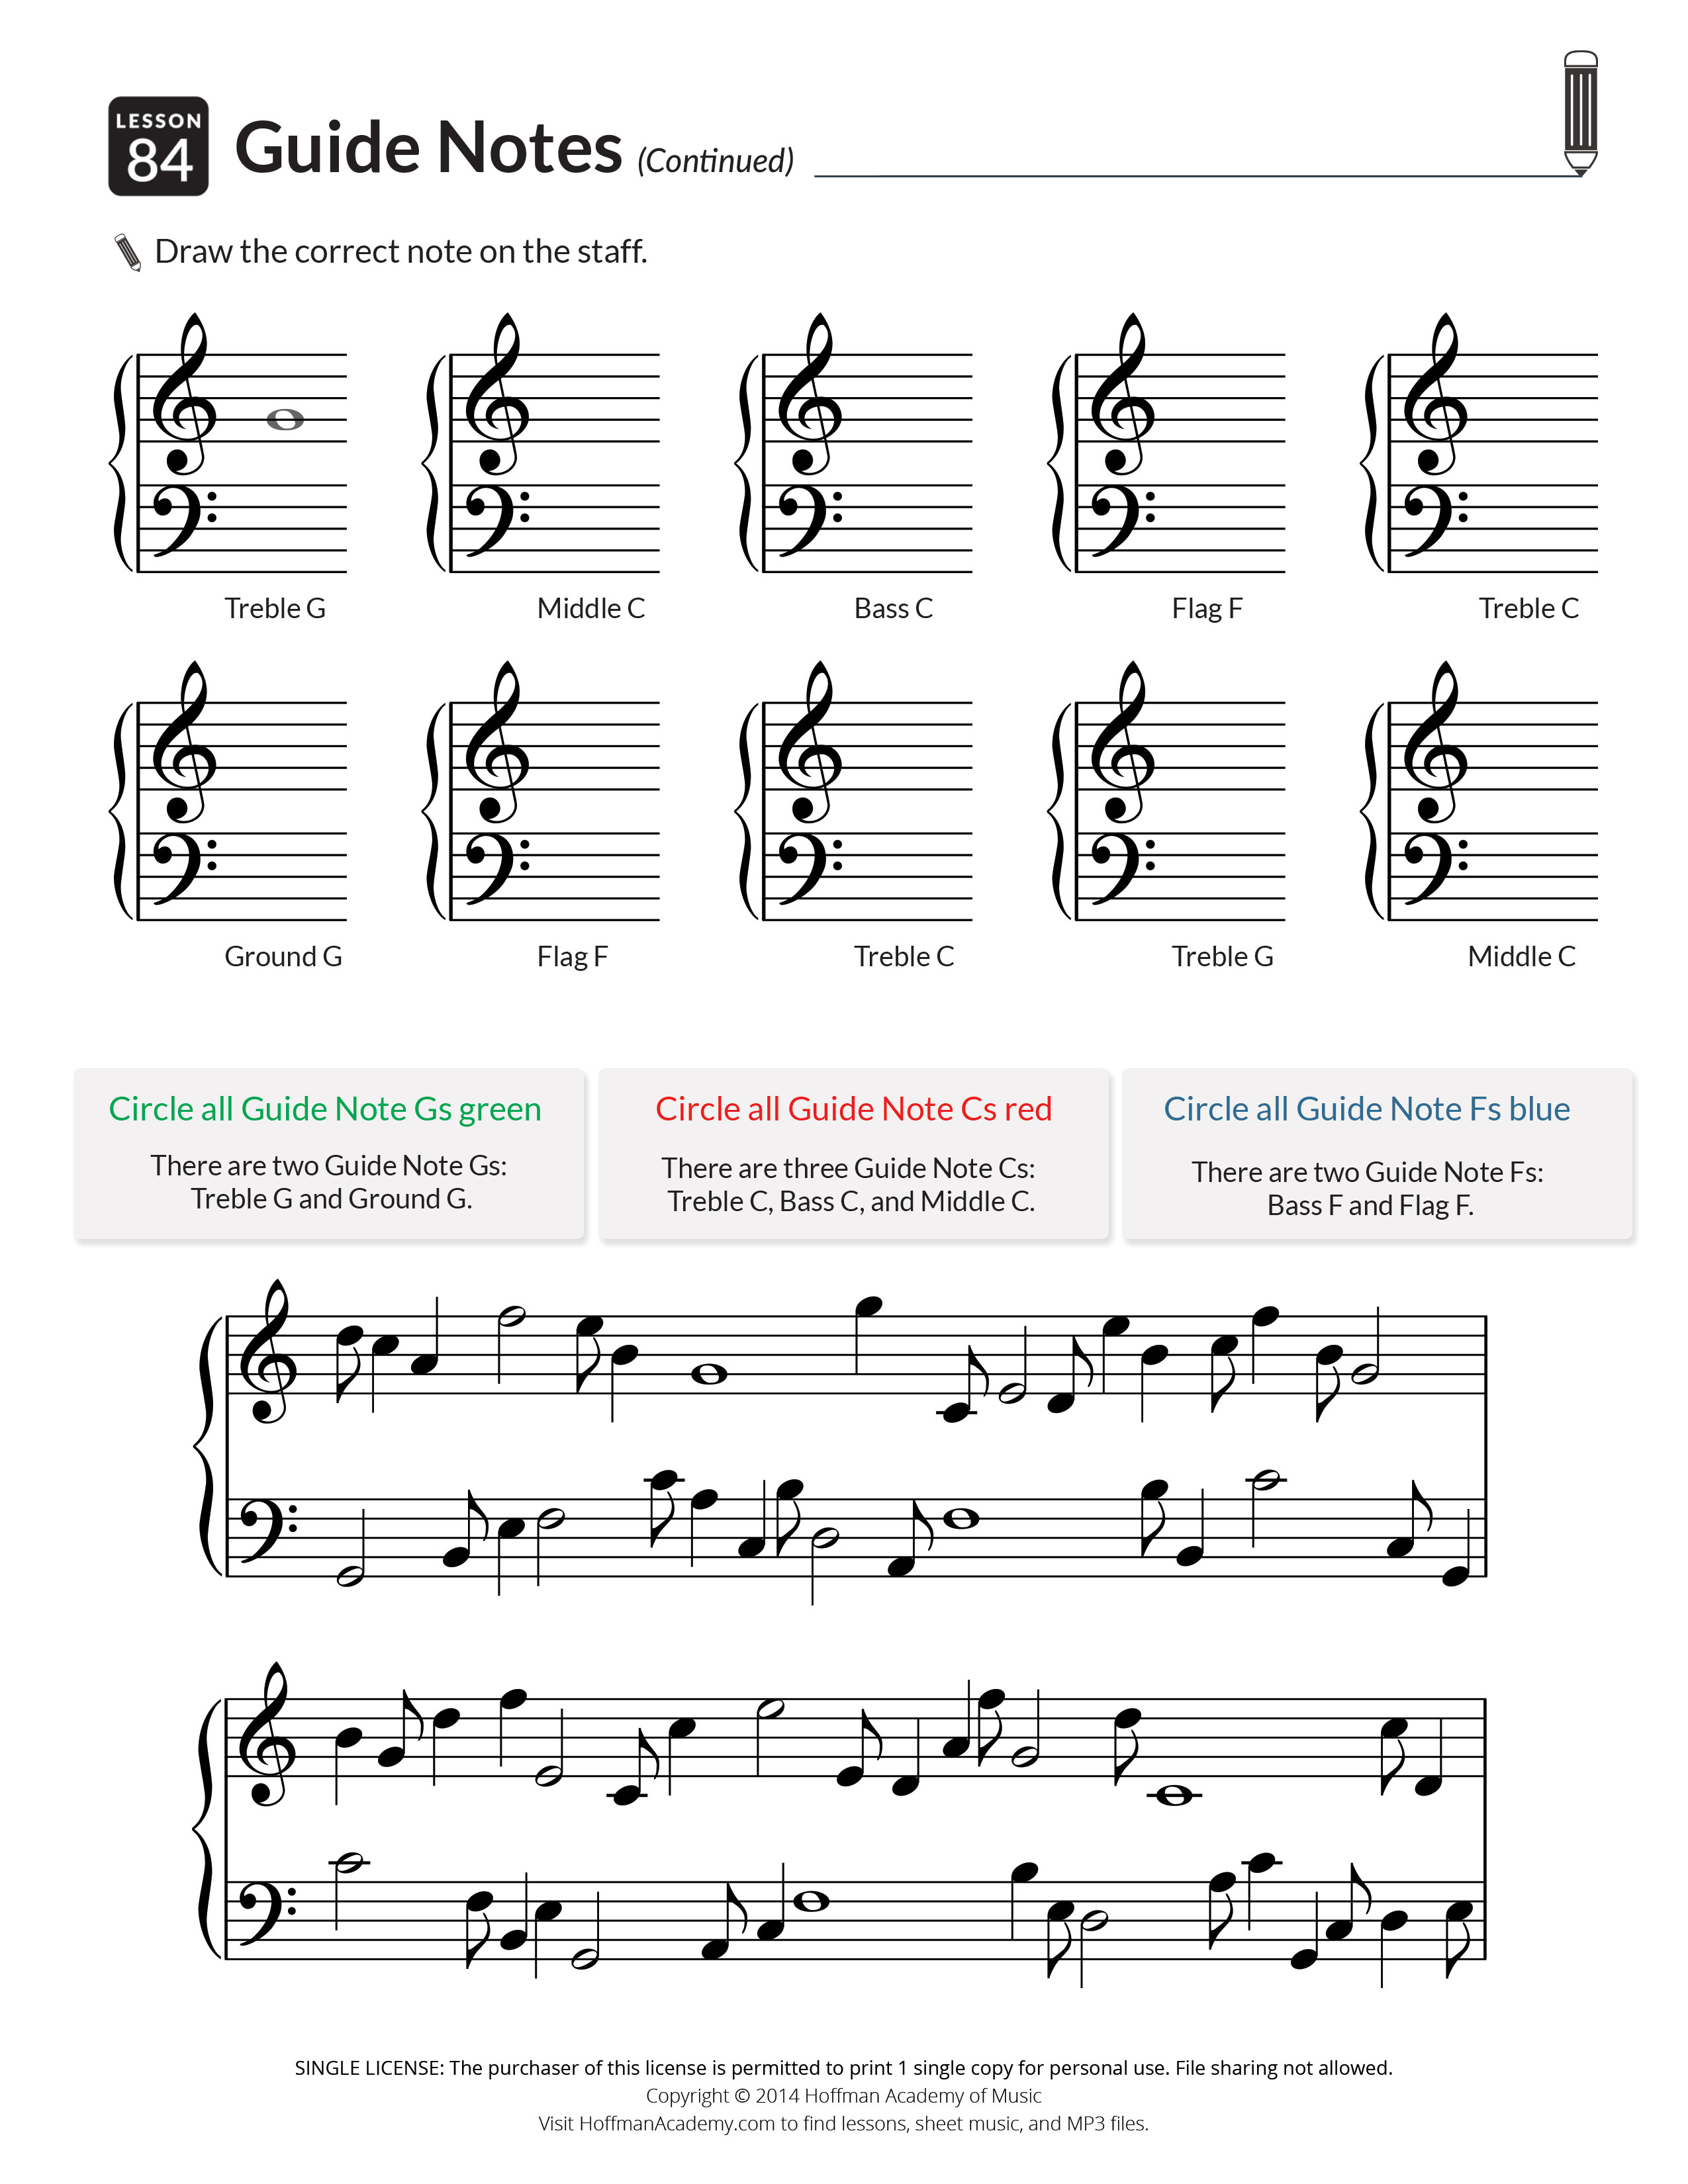 Printables &amp;amp; Audio For Piano Units 1-5: Lessons 1-100 - Hoffman | Beginner Piano Worksheets Printable Free